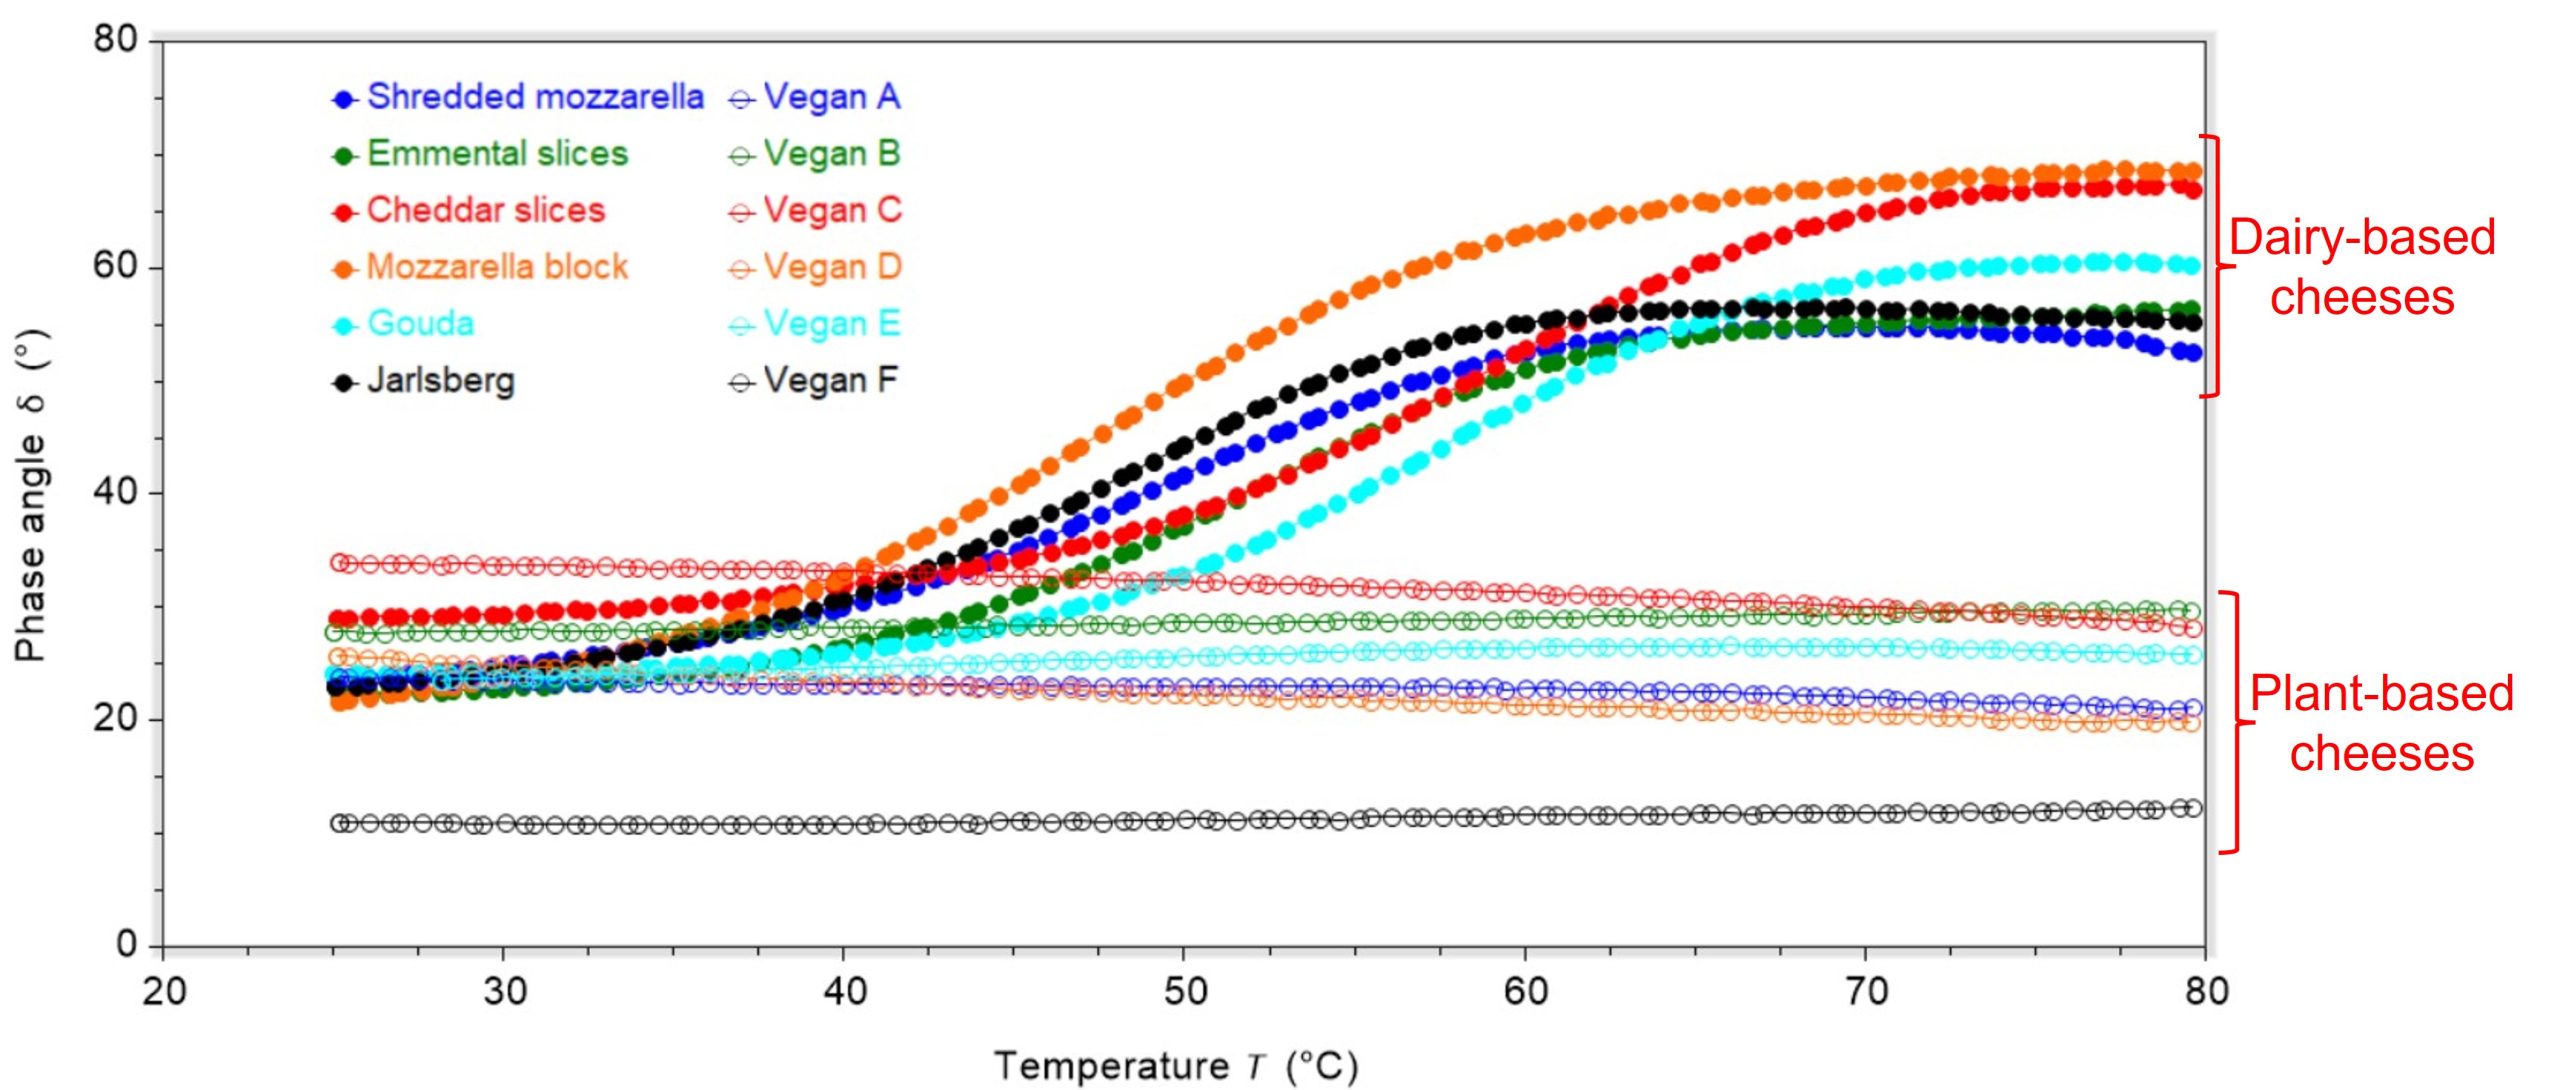 phase angle data between 20 and 80 °C for dairy and plant-based cheeses